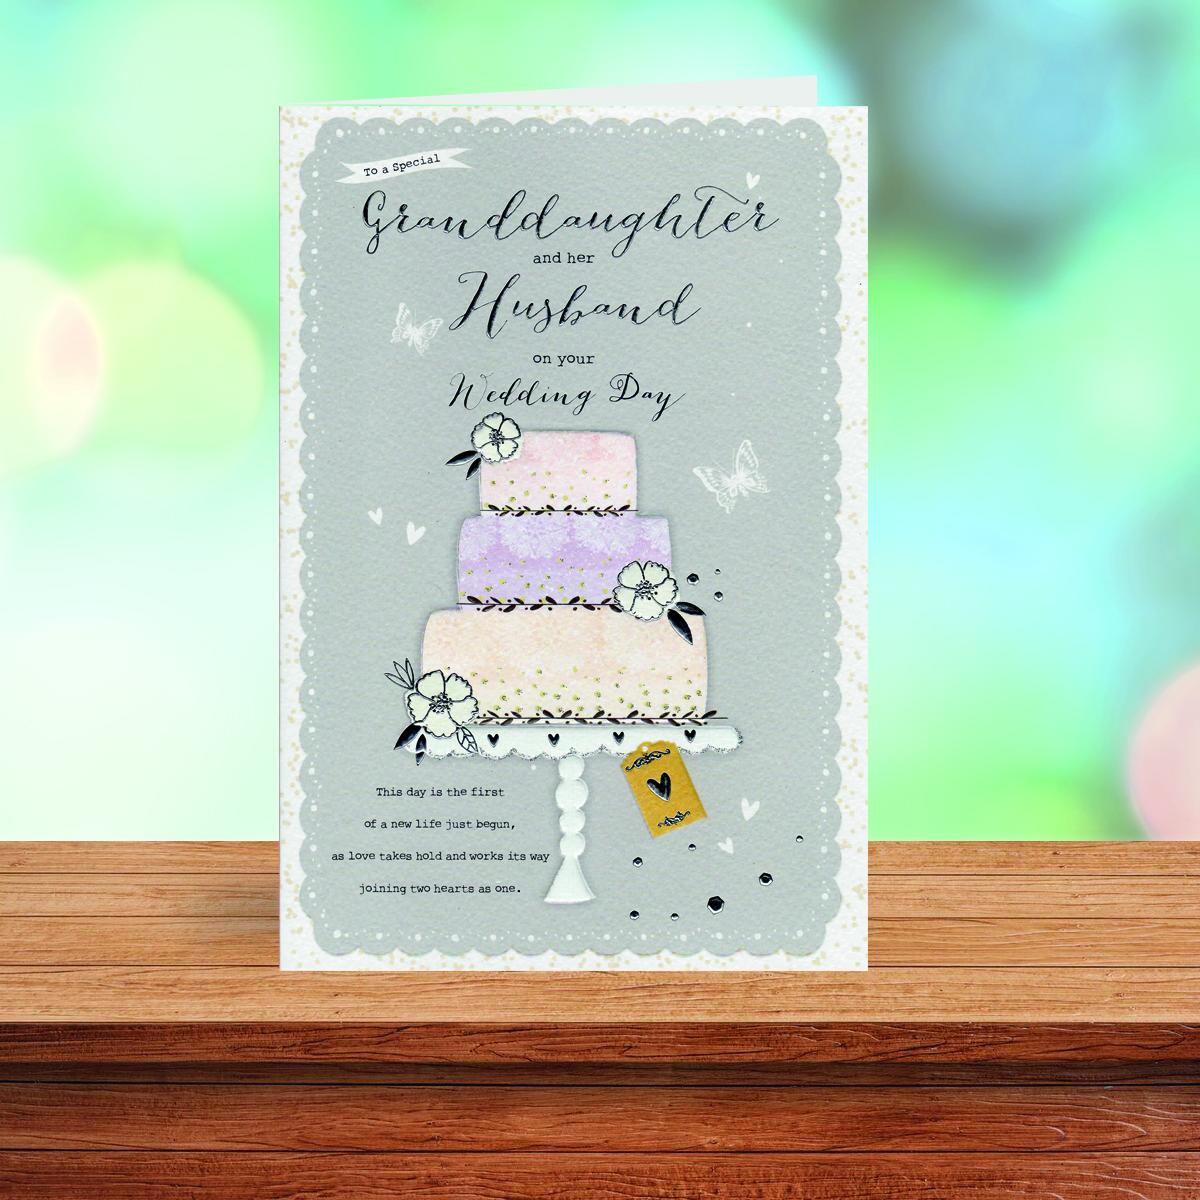 A Selection Of Cards To Show The Depth Of Range In Our Granddaughter And Husband Wedding Cards Section